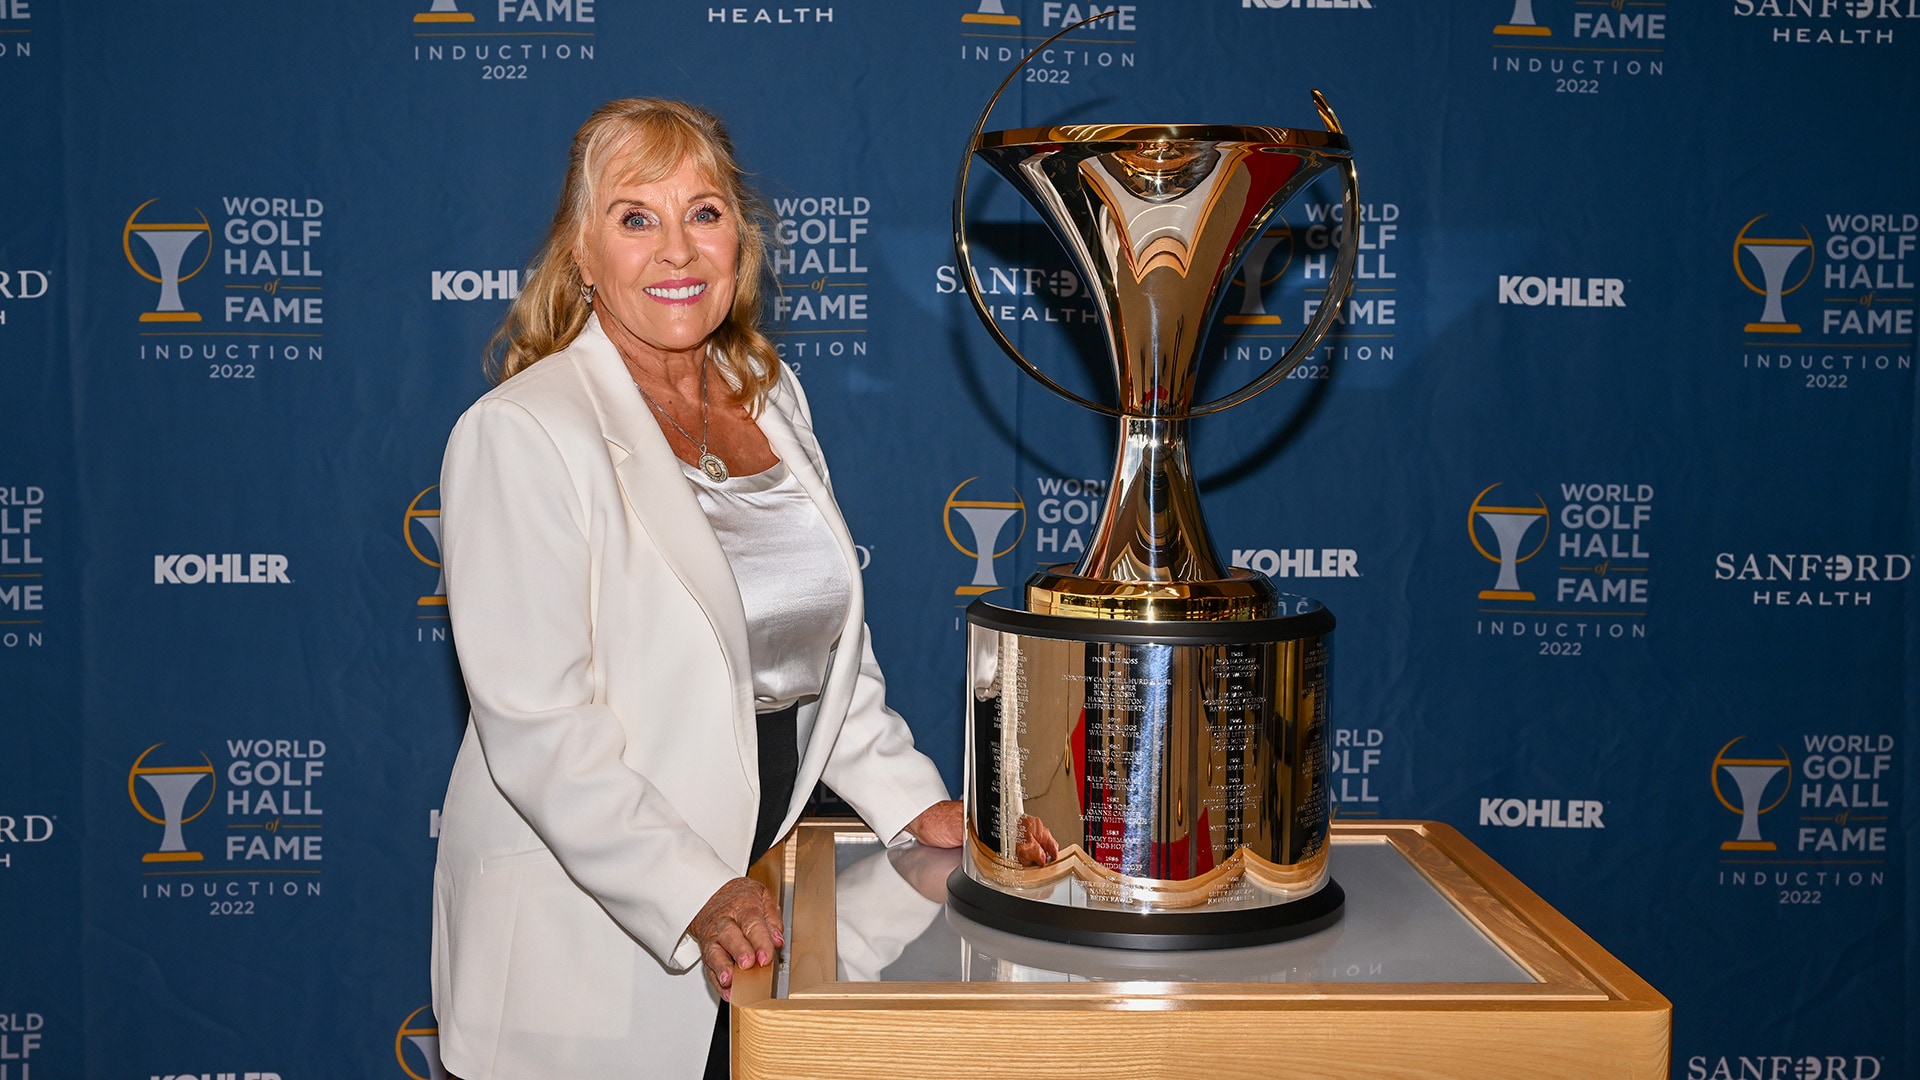 World Golf Hall of Famer Jan Stephenson diagnosed with breast cancer